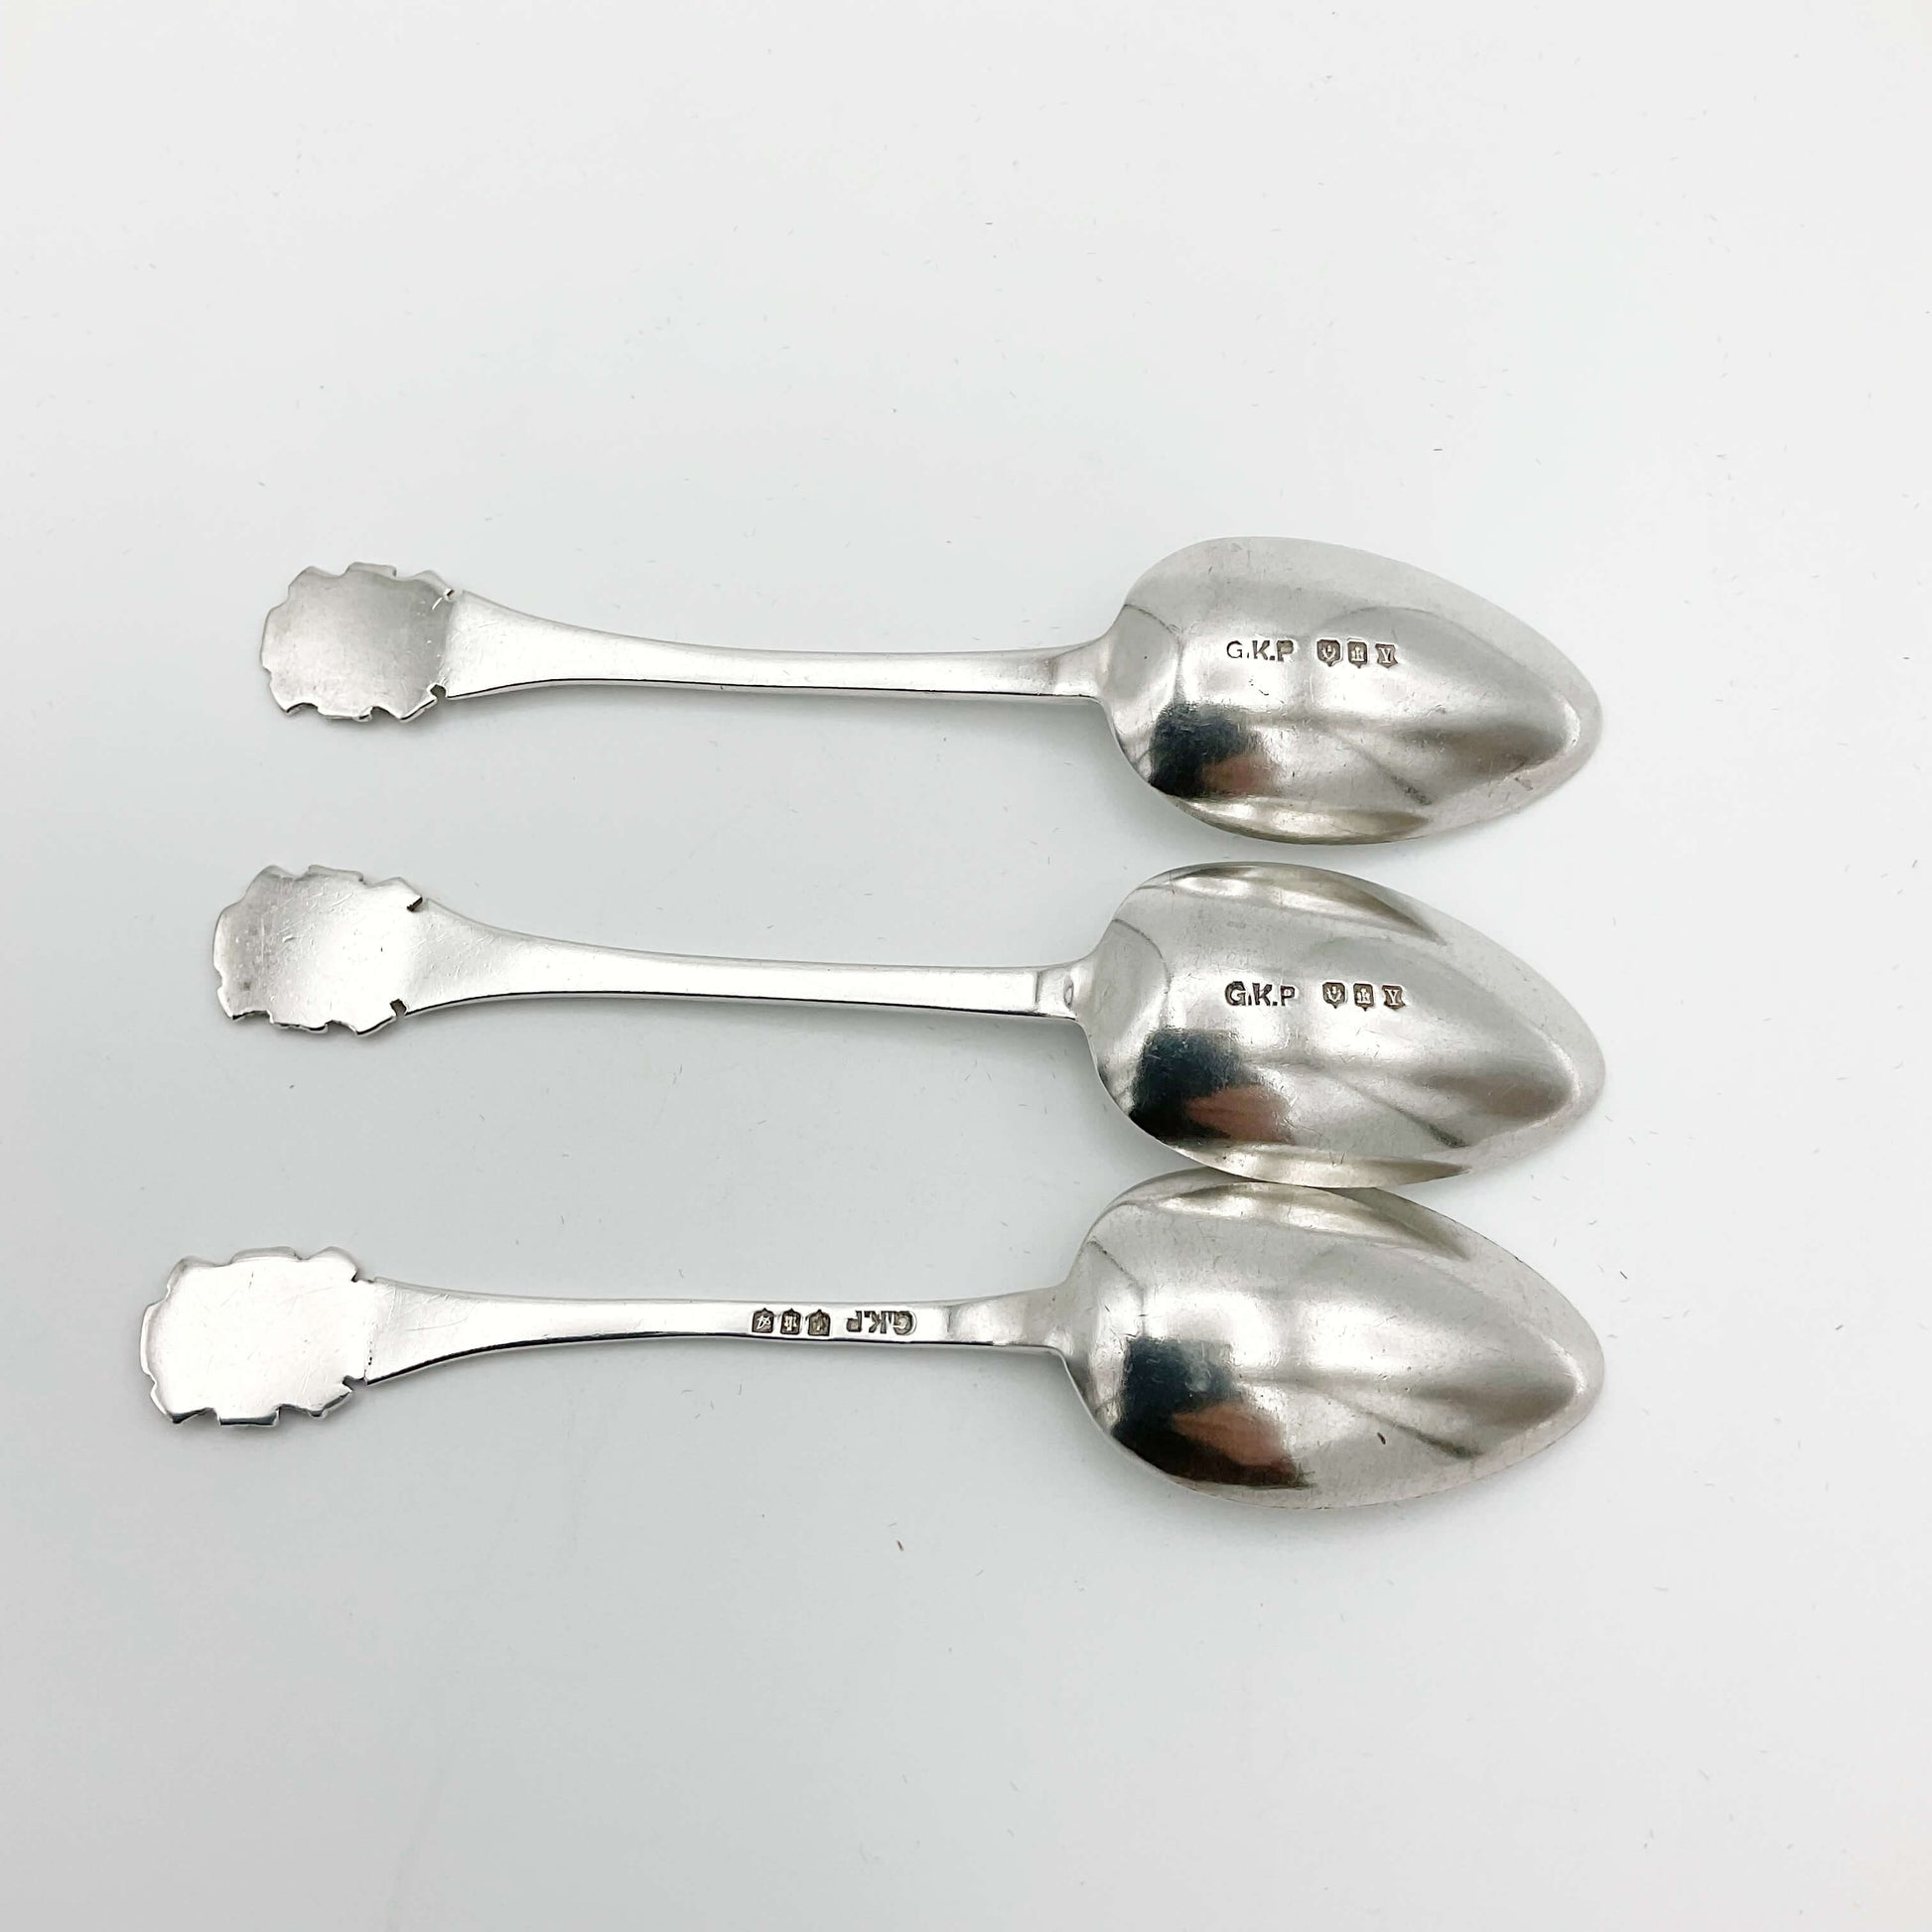 1930s silver coffee spoons showing the hallmarks on their backs